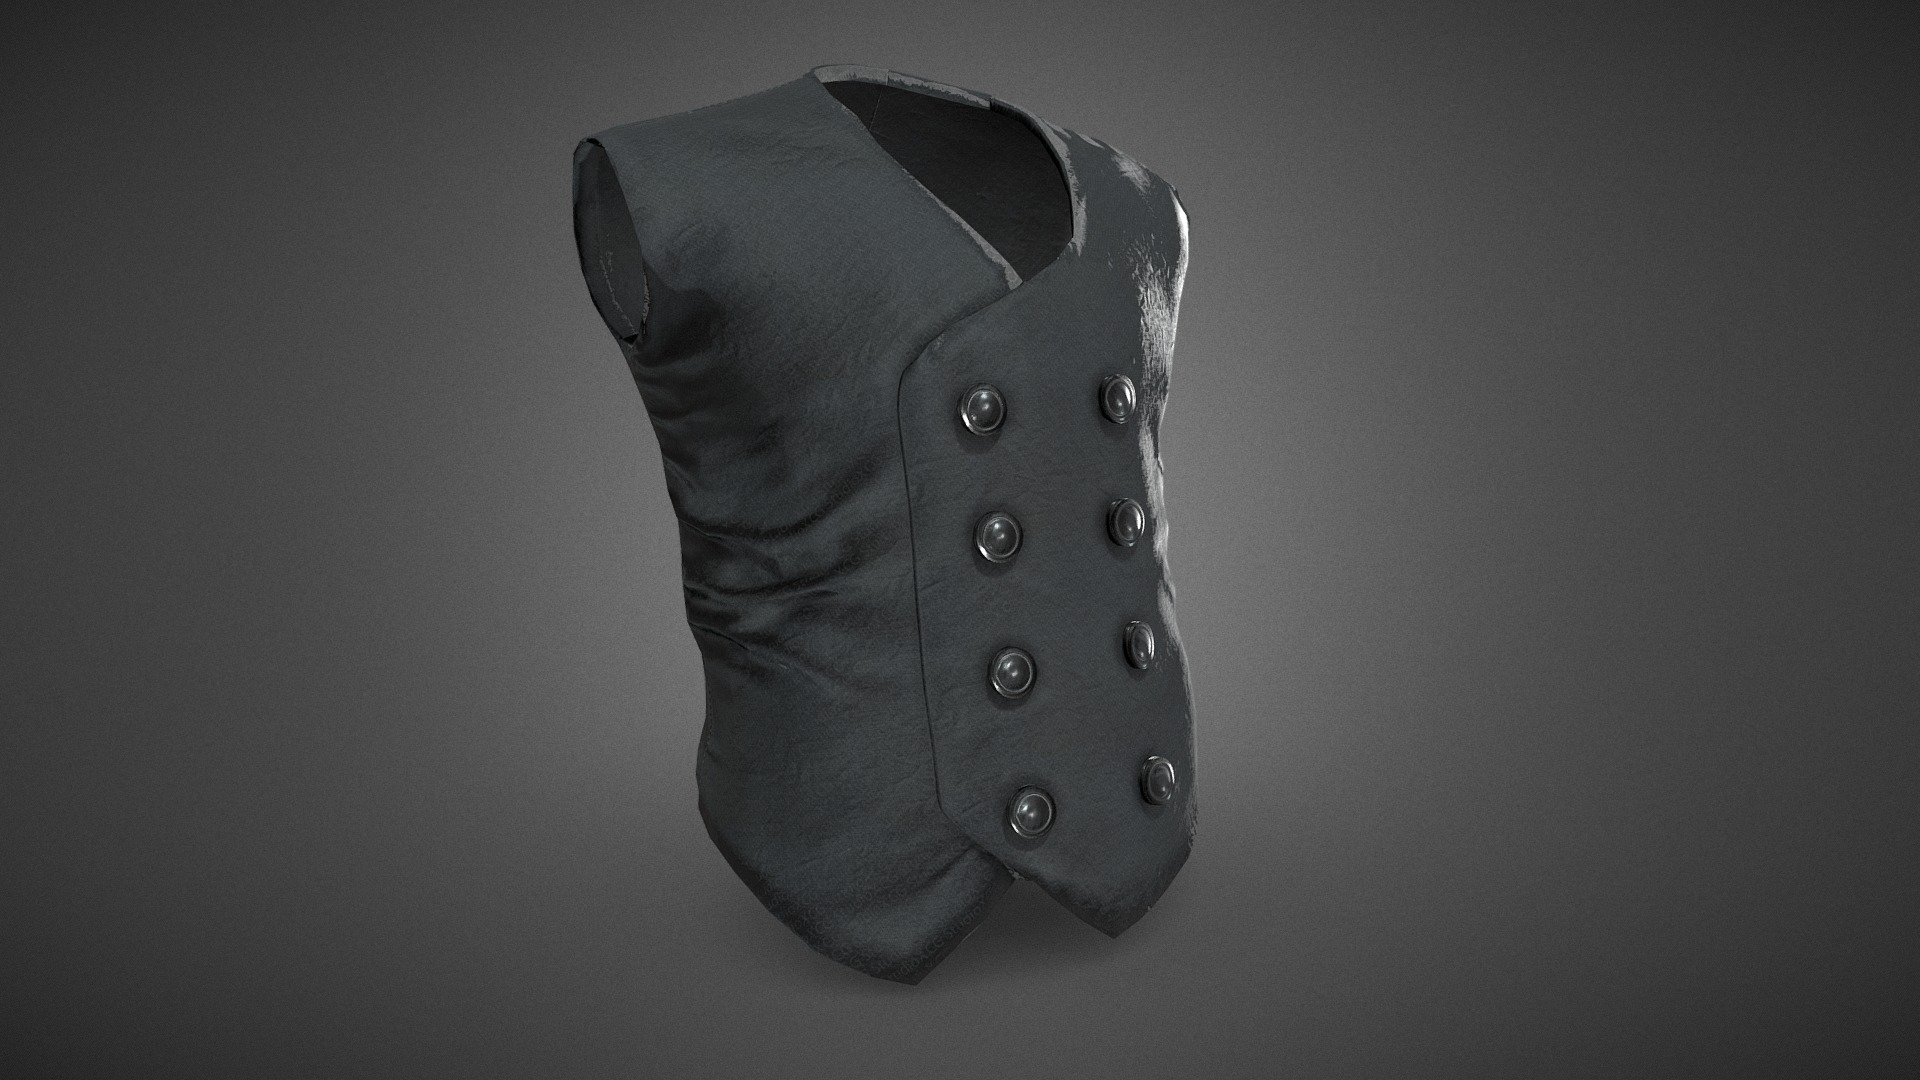 CG StudioX Present :
Cowboy Vest lowpoly/PBR




This is Cowboy Vest Comes with Specular and Metalness PBR.

The photo been rendered using Marmoset Toolbag 3 (real time game engine )


Features :



Comes with Specular and Metalness PBR 4K texture .

Good topology.

Low polygon geometry.

The Model is prefect for game for both Specular workflow as in Unity and Metalness as in Unreal engine .

The model also rendered using Marmoset Toolbag 3 with both Specular and Metalness PBR and also included in the product with the full texture.

The product has ID map in every part for changing any part in the model .

All photo in the presentation images for the low poly (no dividing applied).

The texture can be easily adjustable .


Texture :
ALL Texture [Albedo -Normal-Metalness -Roughness-Gloss-Specular-ID-AO] (4096*4096).


Files :
Marmoset Toolbag 3 ,Maya,,FBX,OBj with all the textures.




Contact me for if you have any questions.
 - Cowboy Vest - Buy Royalty Free 3D model by CG StudioX (@CG_StudioX) 3d model